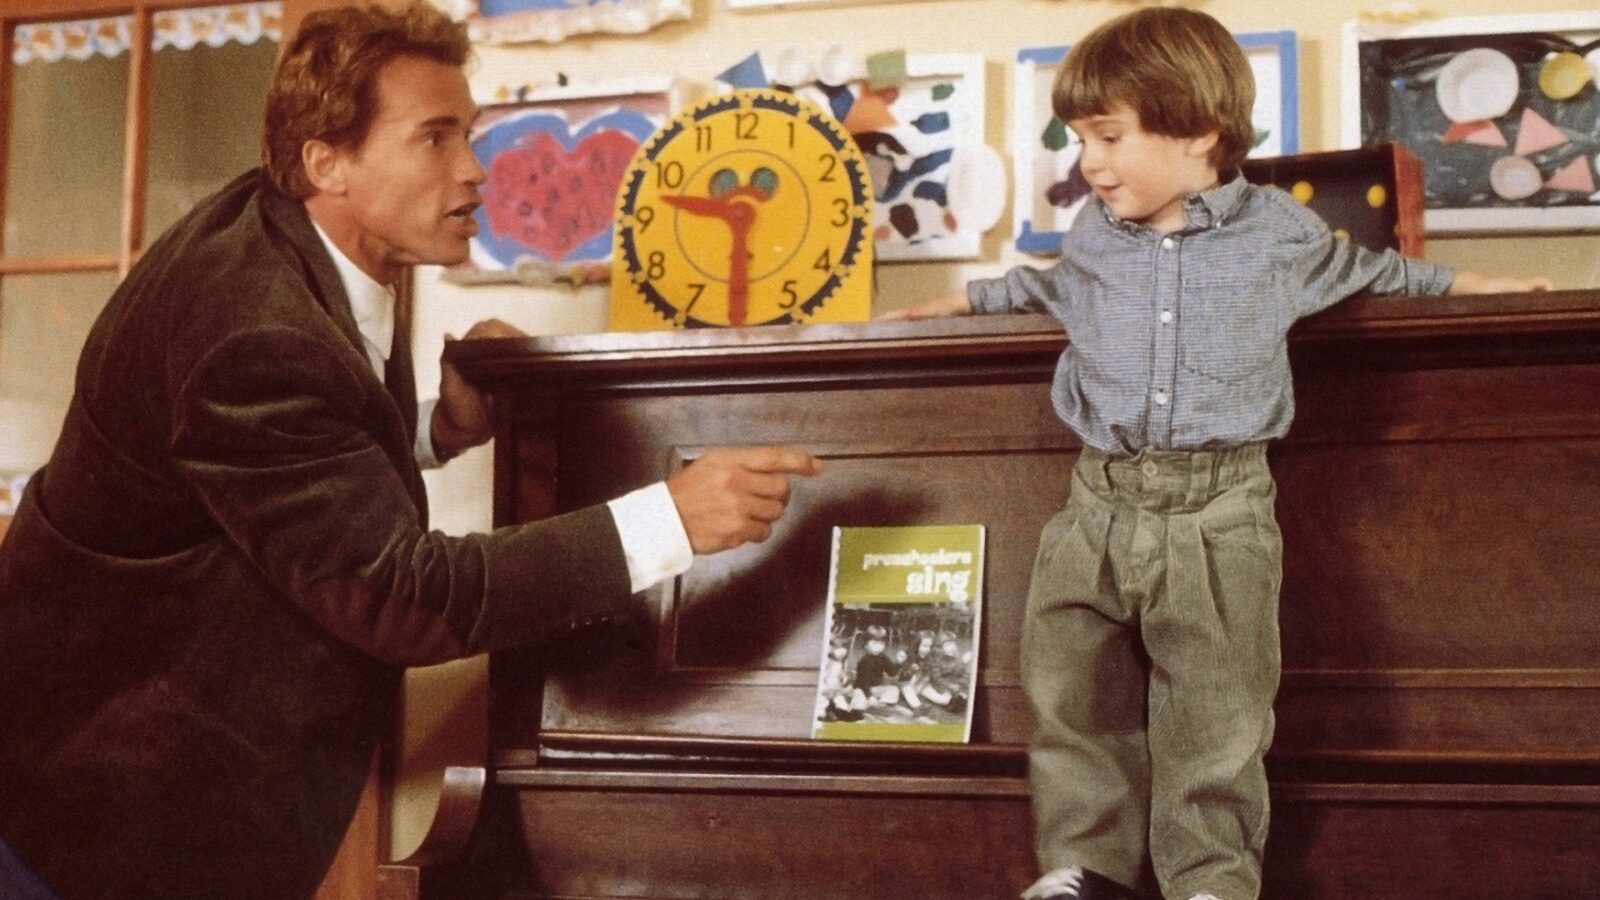 How Many of These Classic 90s Movies Can You Identify from Just One Image? Kindergarten Cop 1990